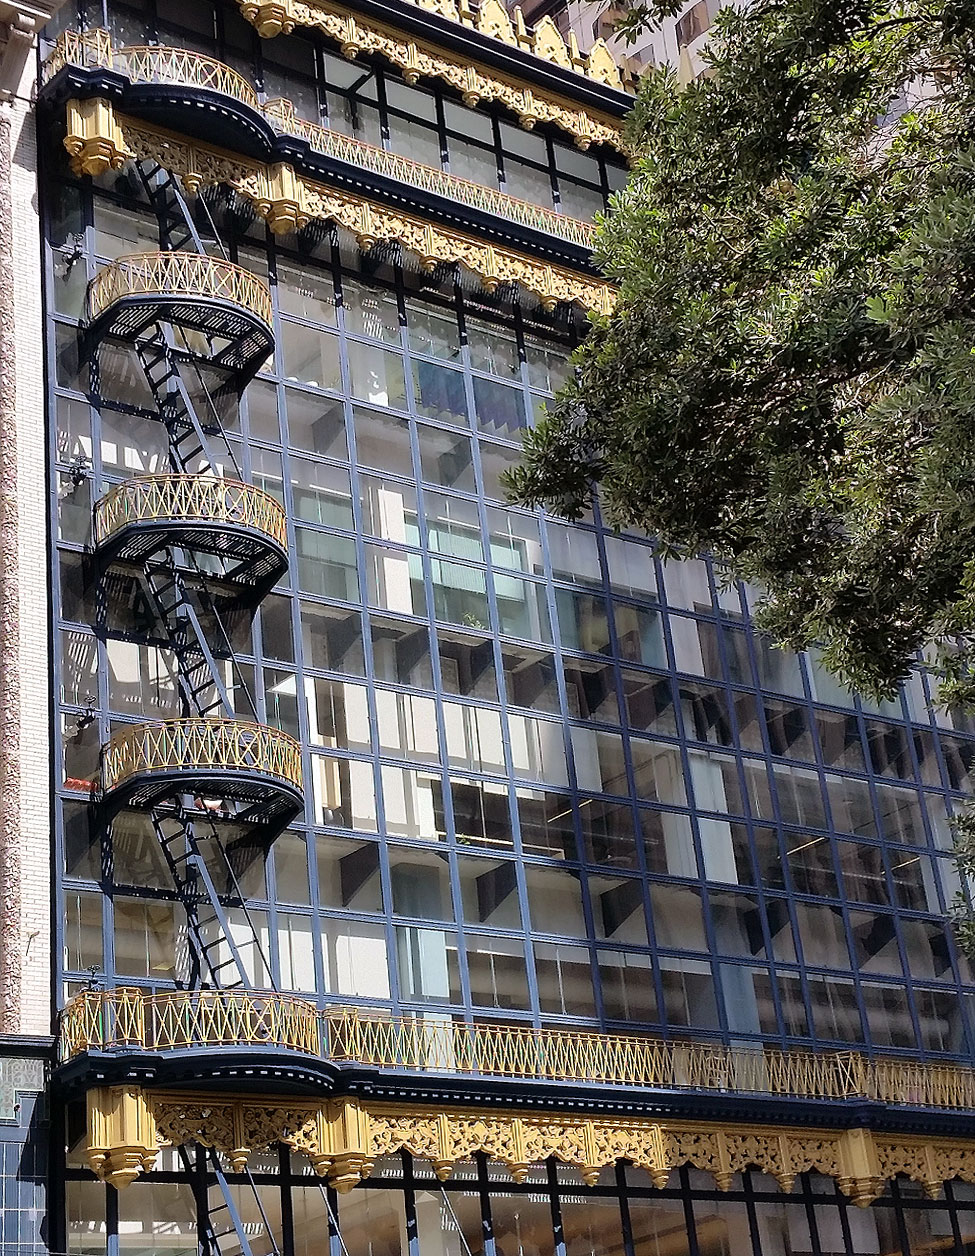 Street-level view of Hallidie Building, showing ornamented fire escapes.